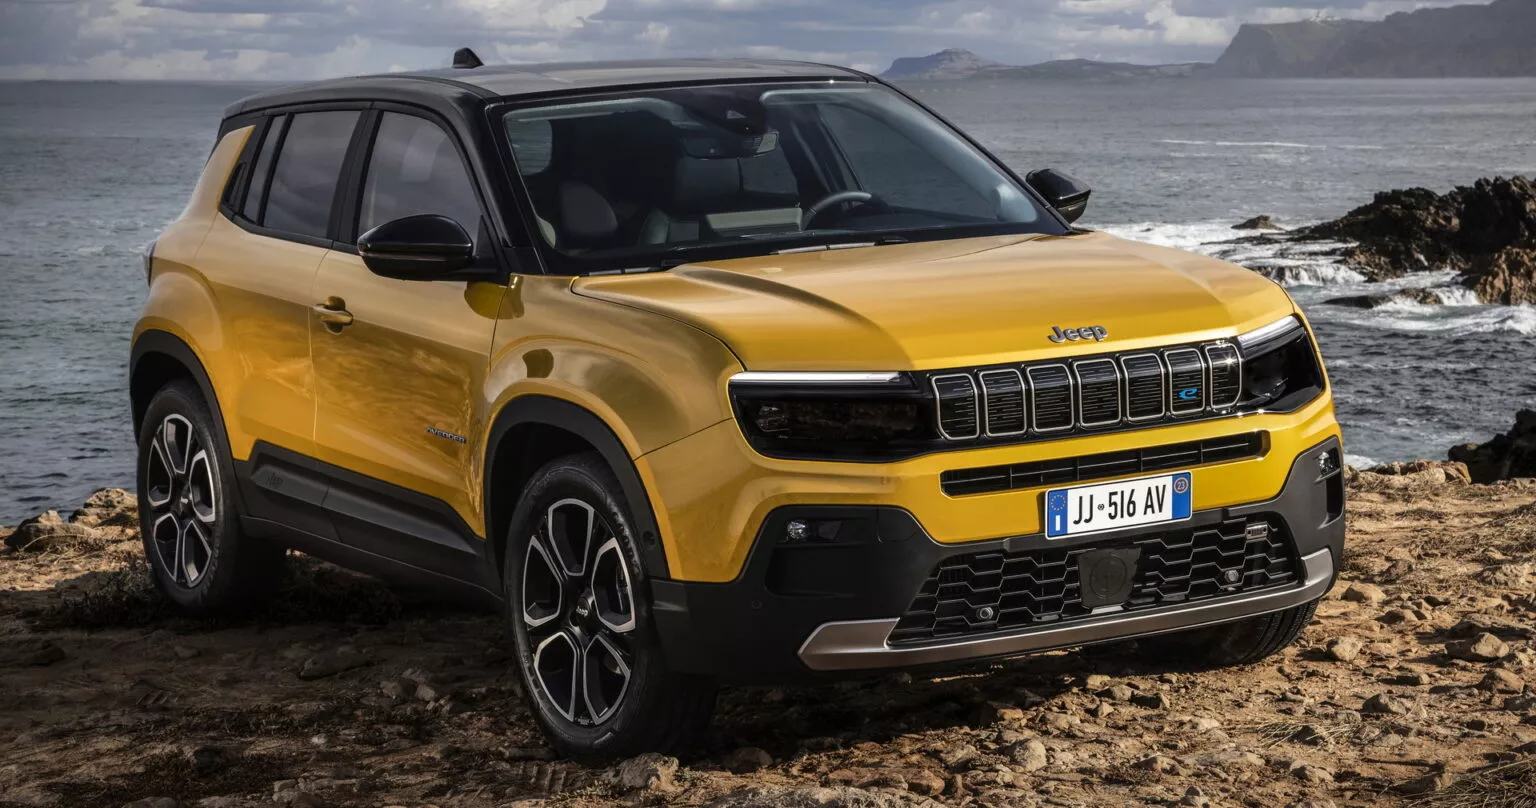 Jeep Avenger named 2023 European Car of the Year at the Brussels Motor Show